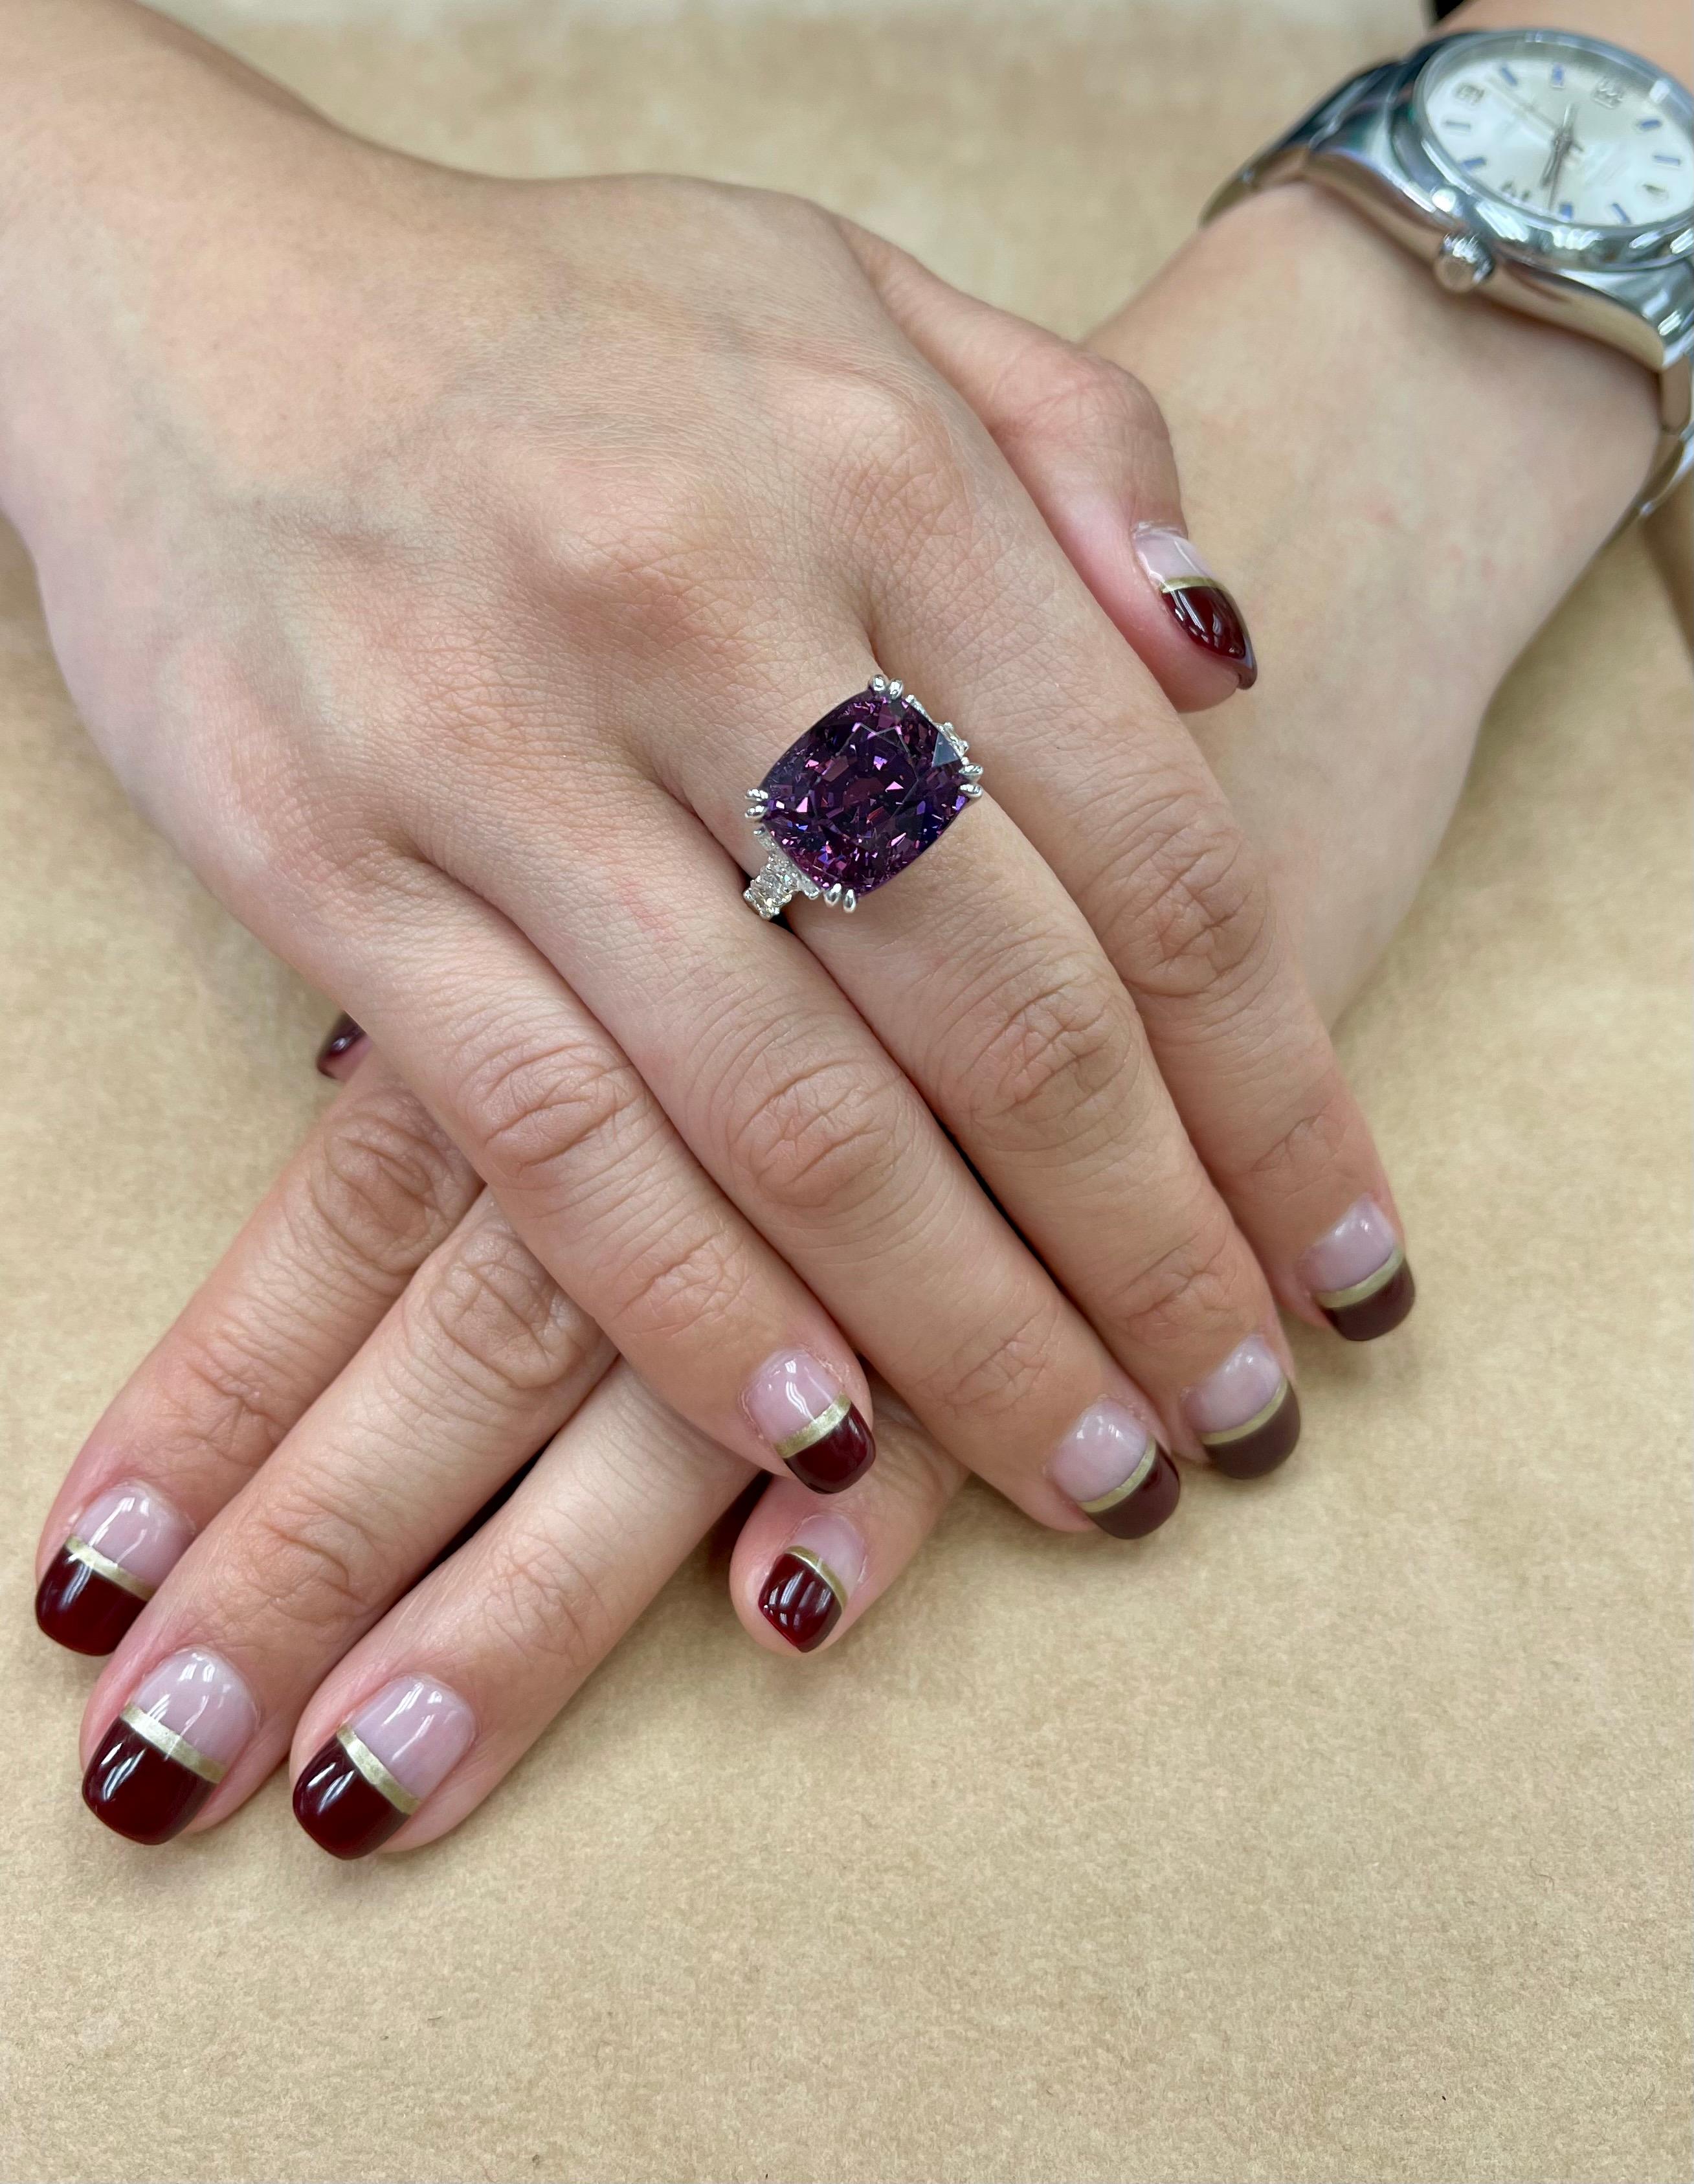 Here is an oversized natural Spinel with a strong deep purple color saturation. It is set in 18k white gold and diamonds. 6 round and 4 marquis diamonds totaling 1 carat. Average size of each diamond is about 0.10 Cts each. The purple Spinel is cut